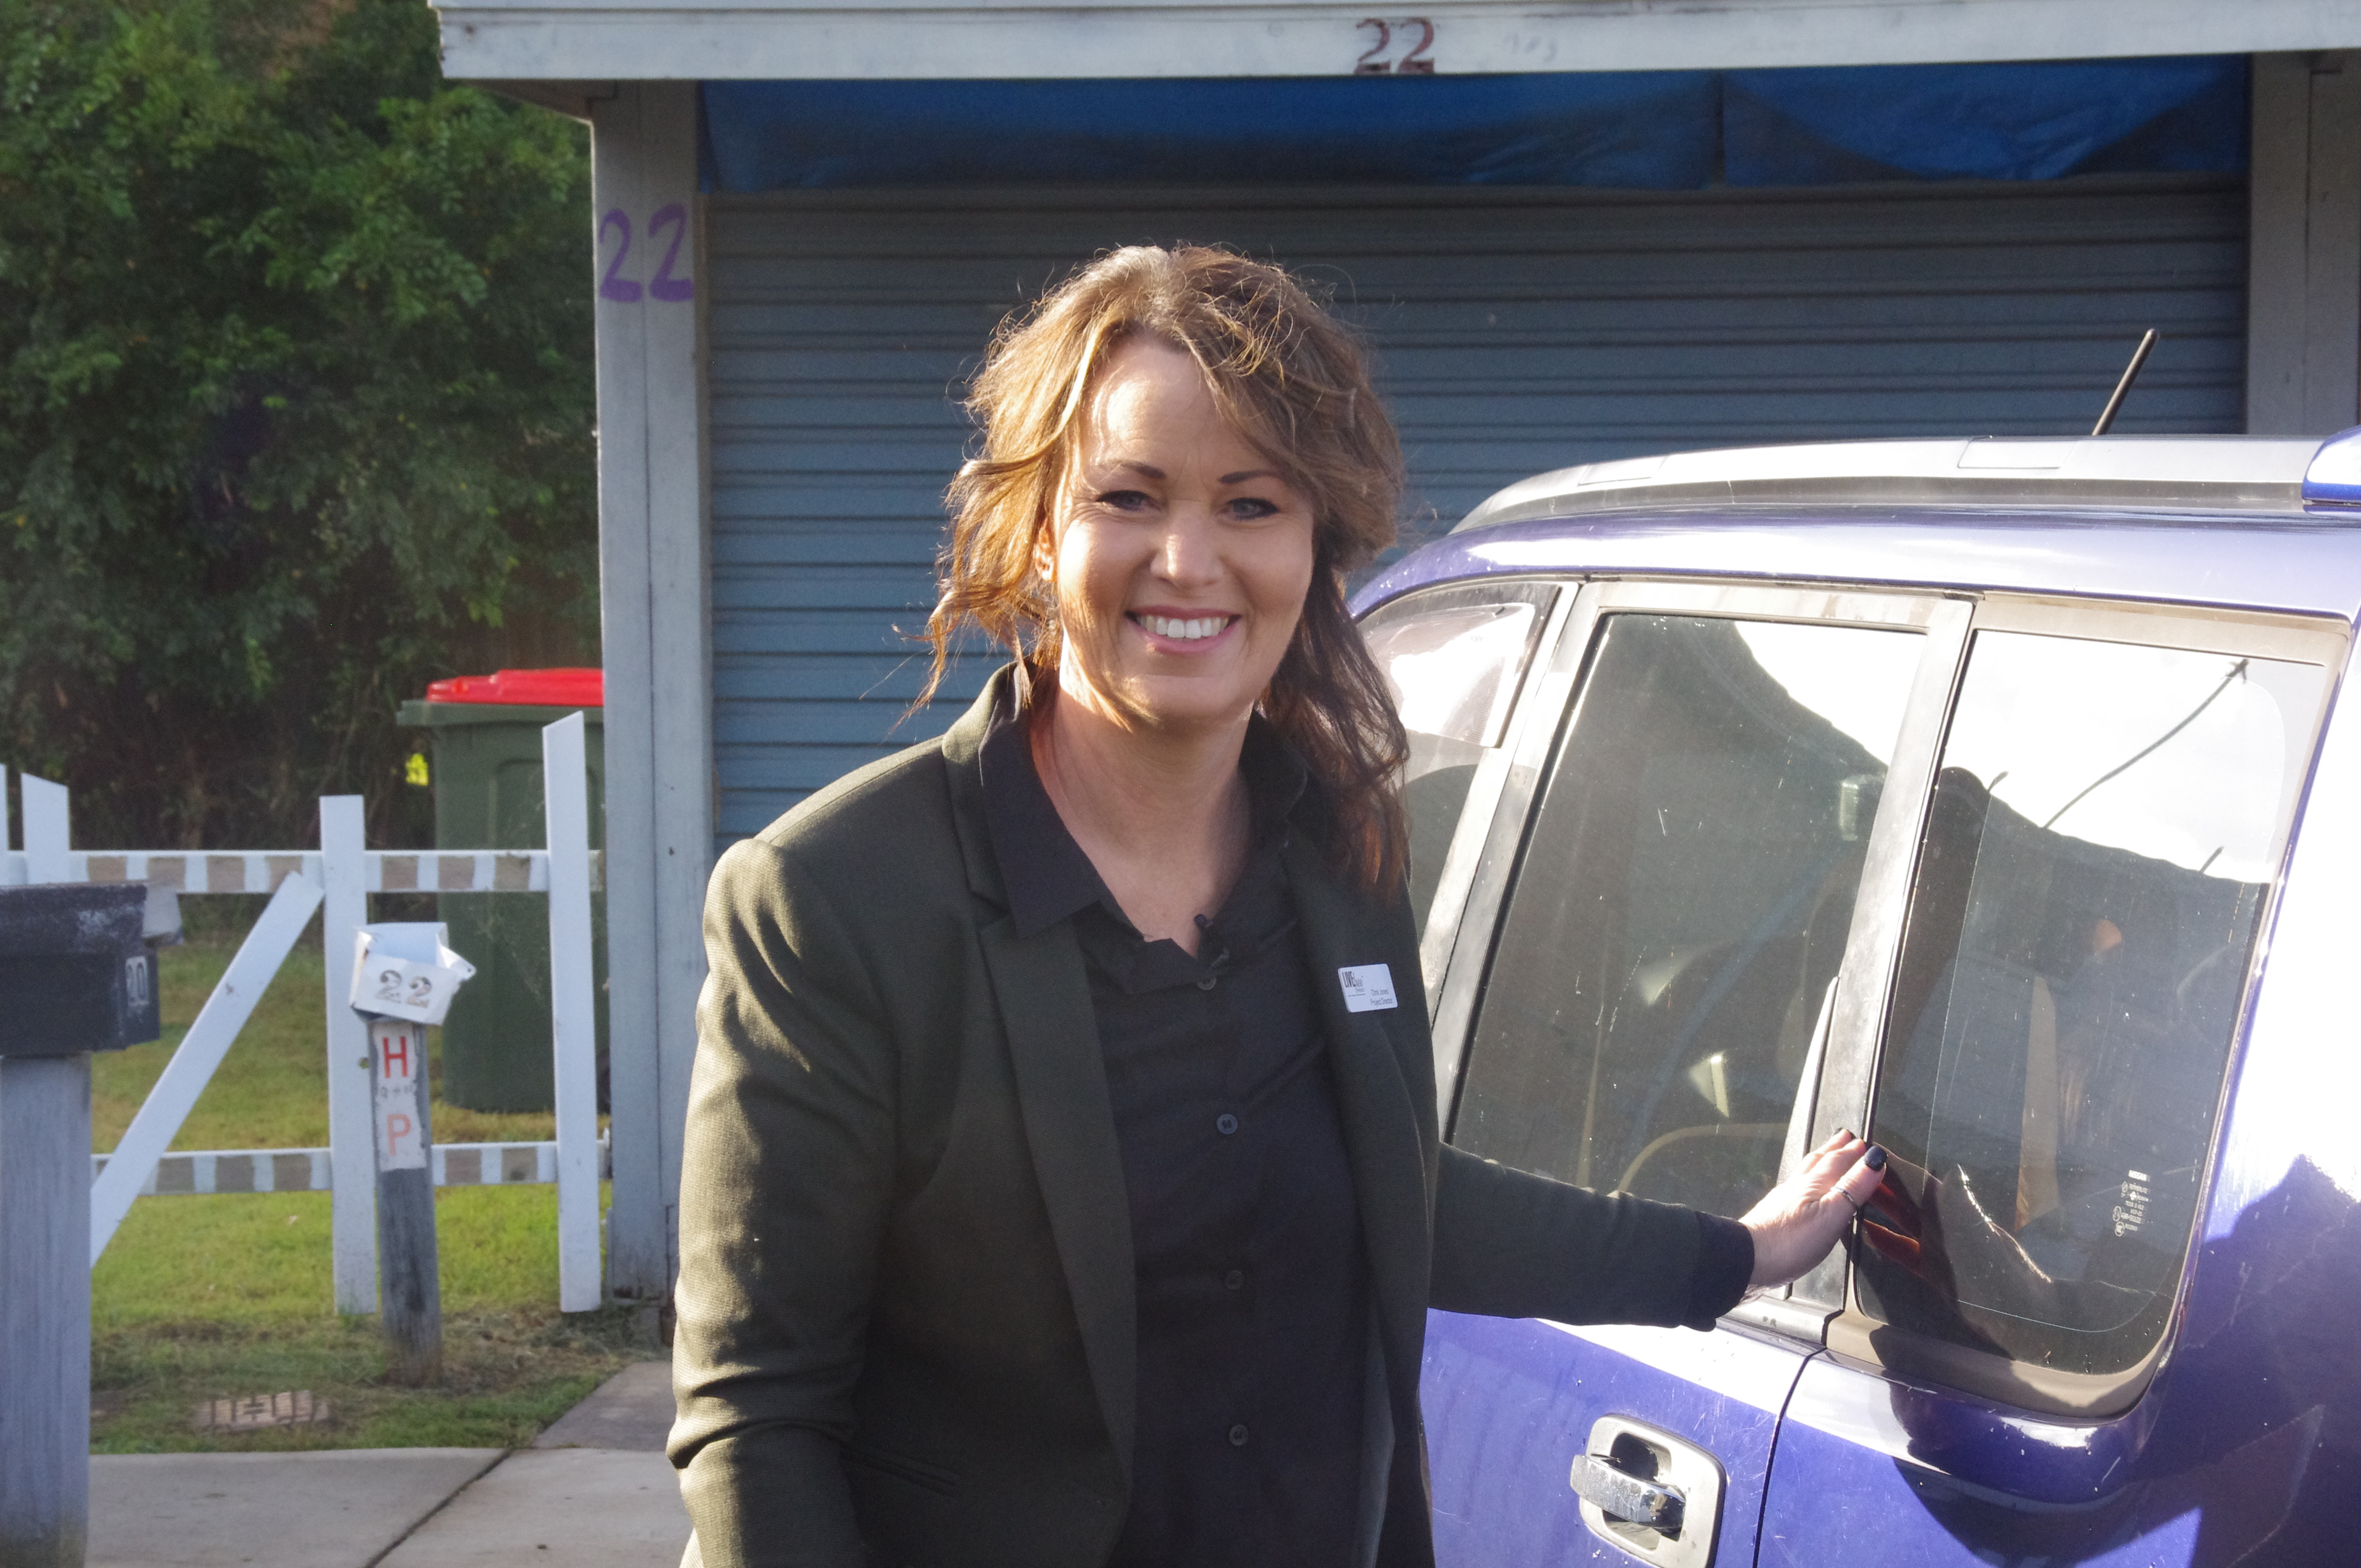 A smiling woman stands in front of a blue car.